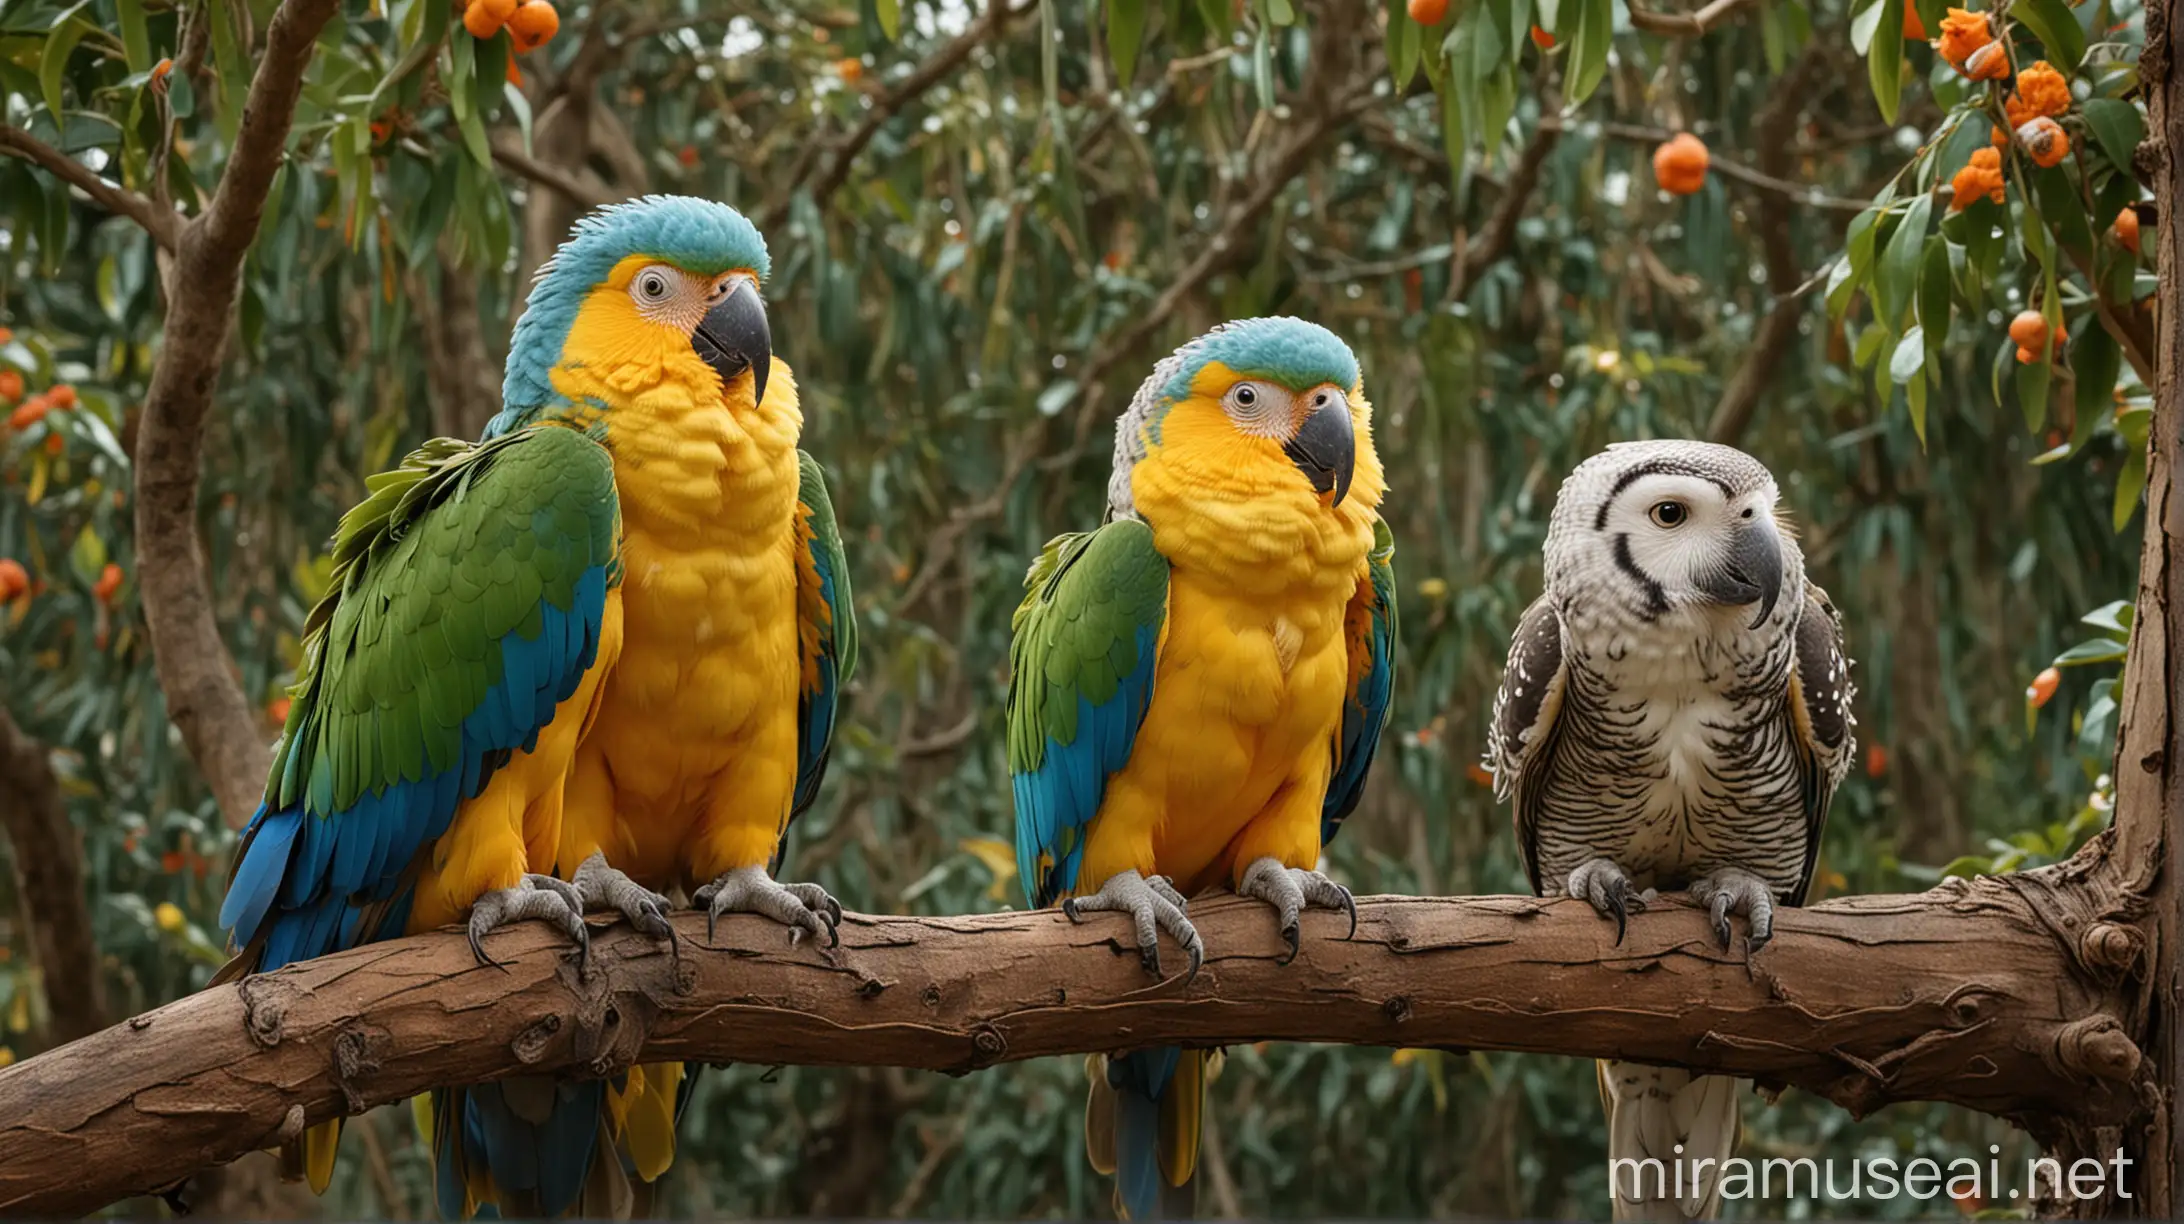 Colorful Parrots and Wise Owl Perched on Tree Branch